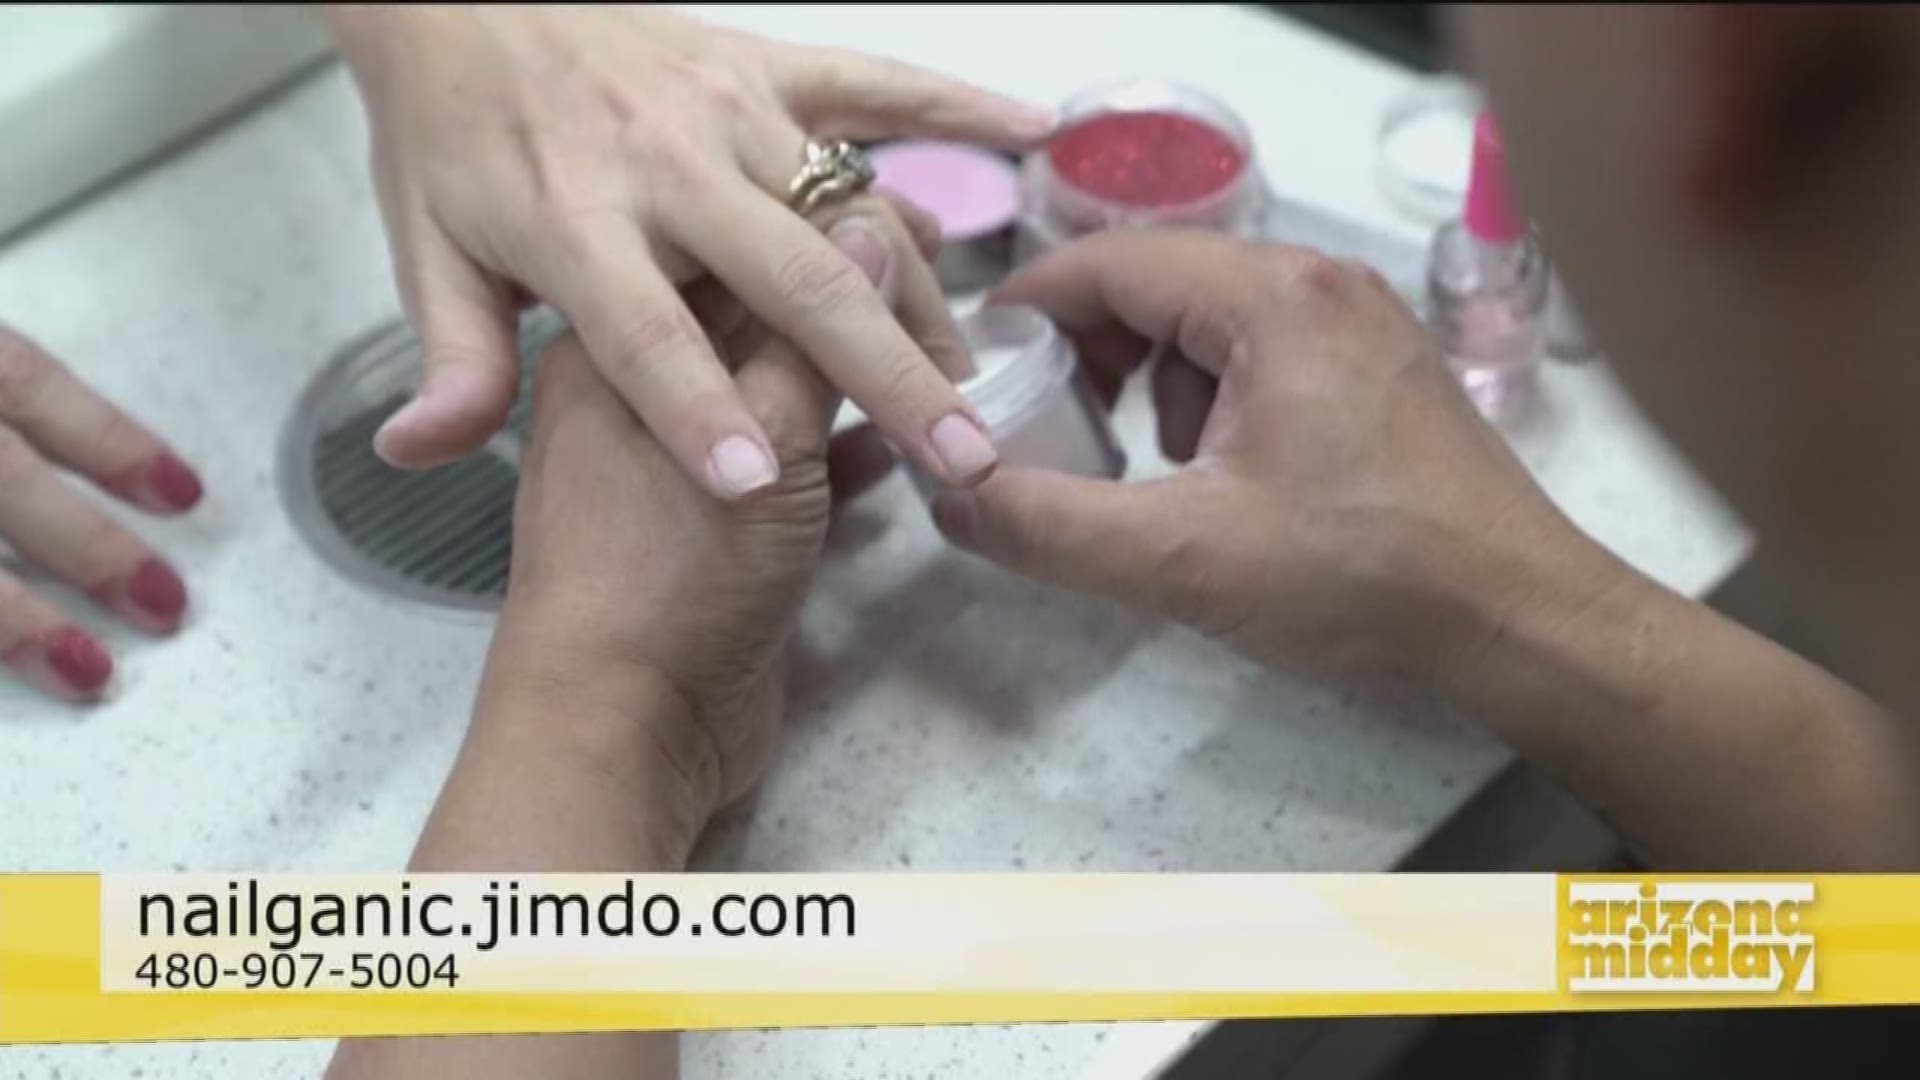 Vicky Nguyen of Nailganic Salon shows us they can give you gorgeous nails the natural way!